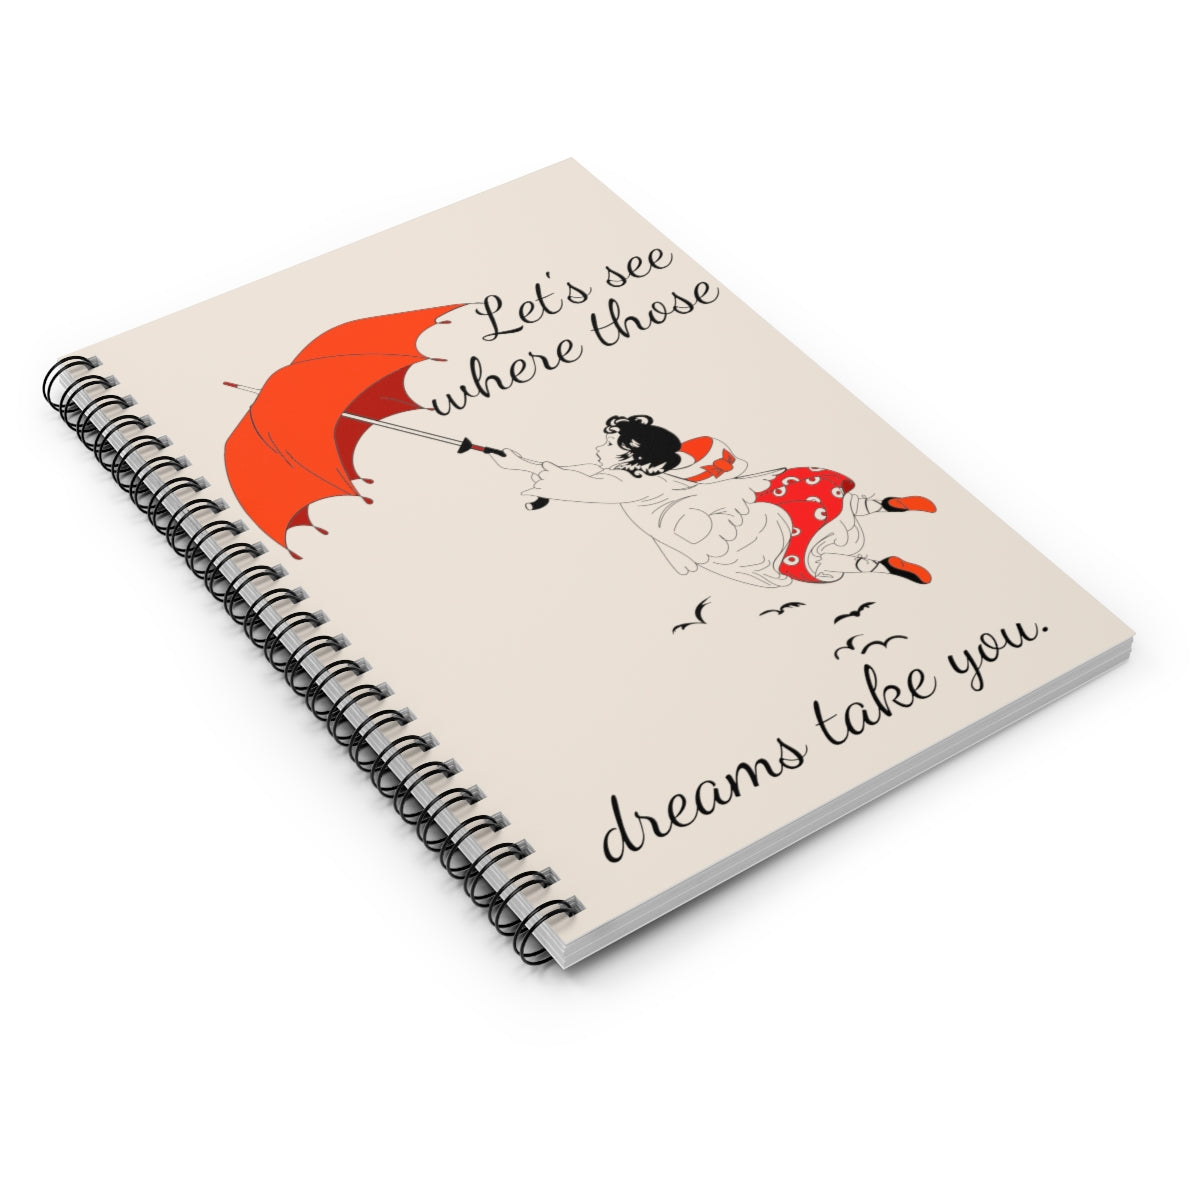 Where the Dreams Lead Spiral Notebook - Ruled Line